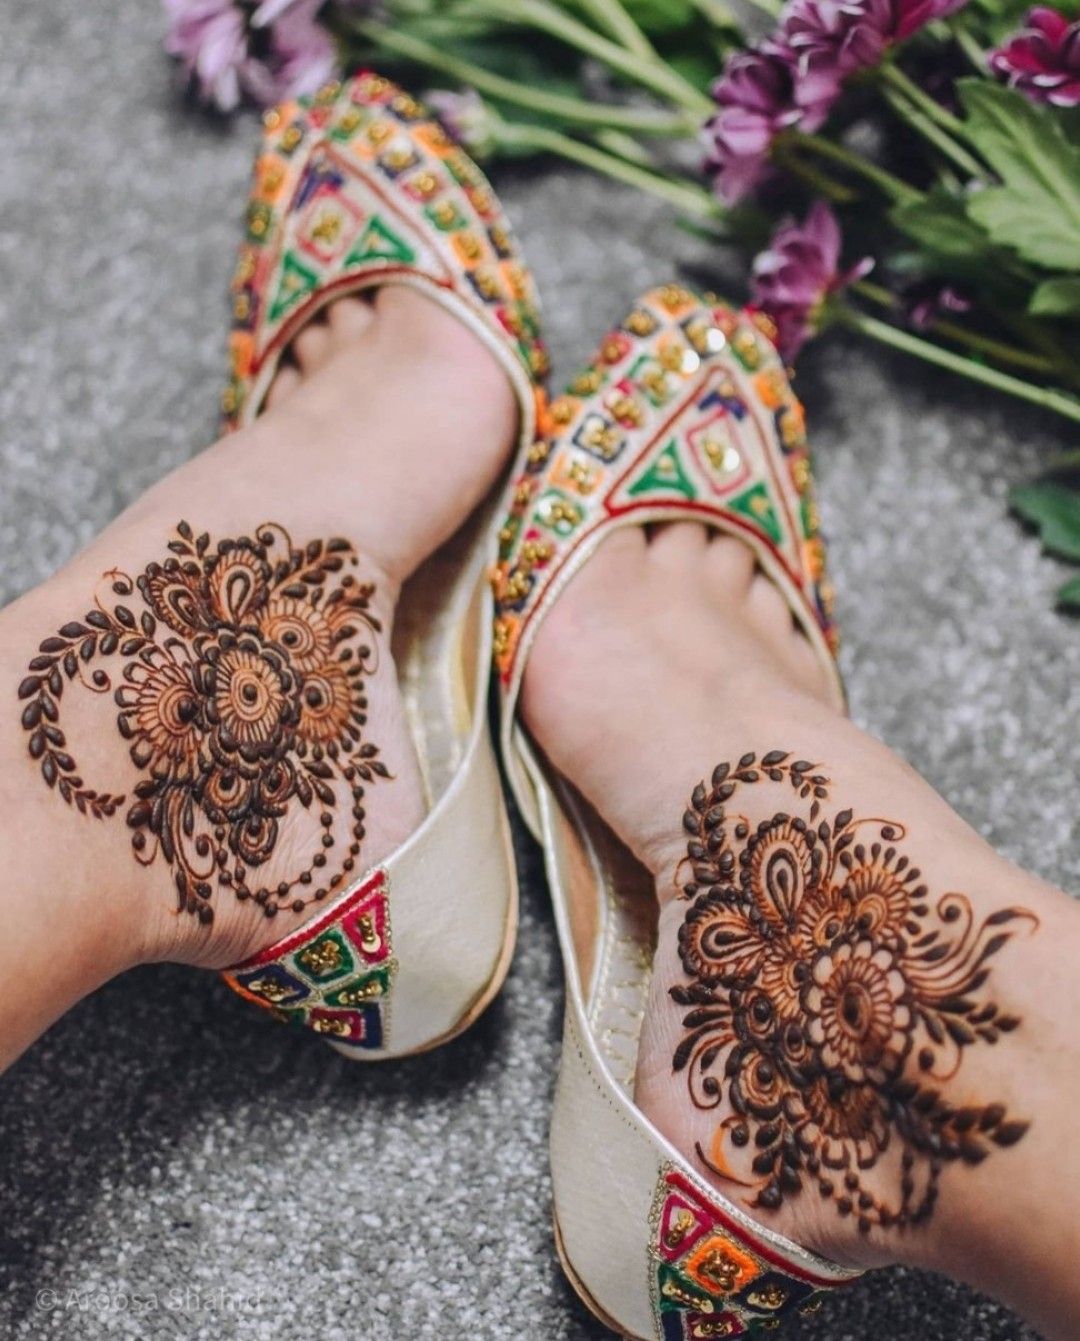 Minimal mehndi for feet with an ankle-only floral pattern